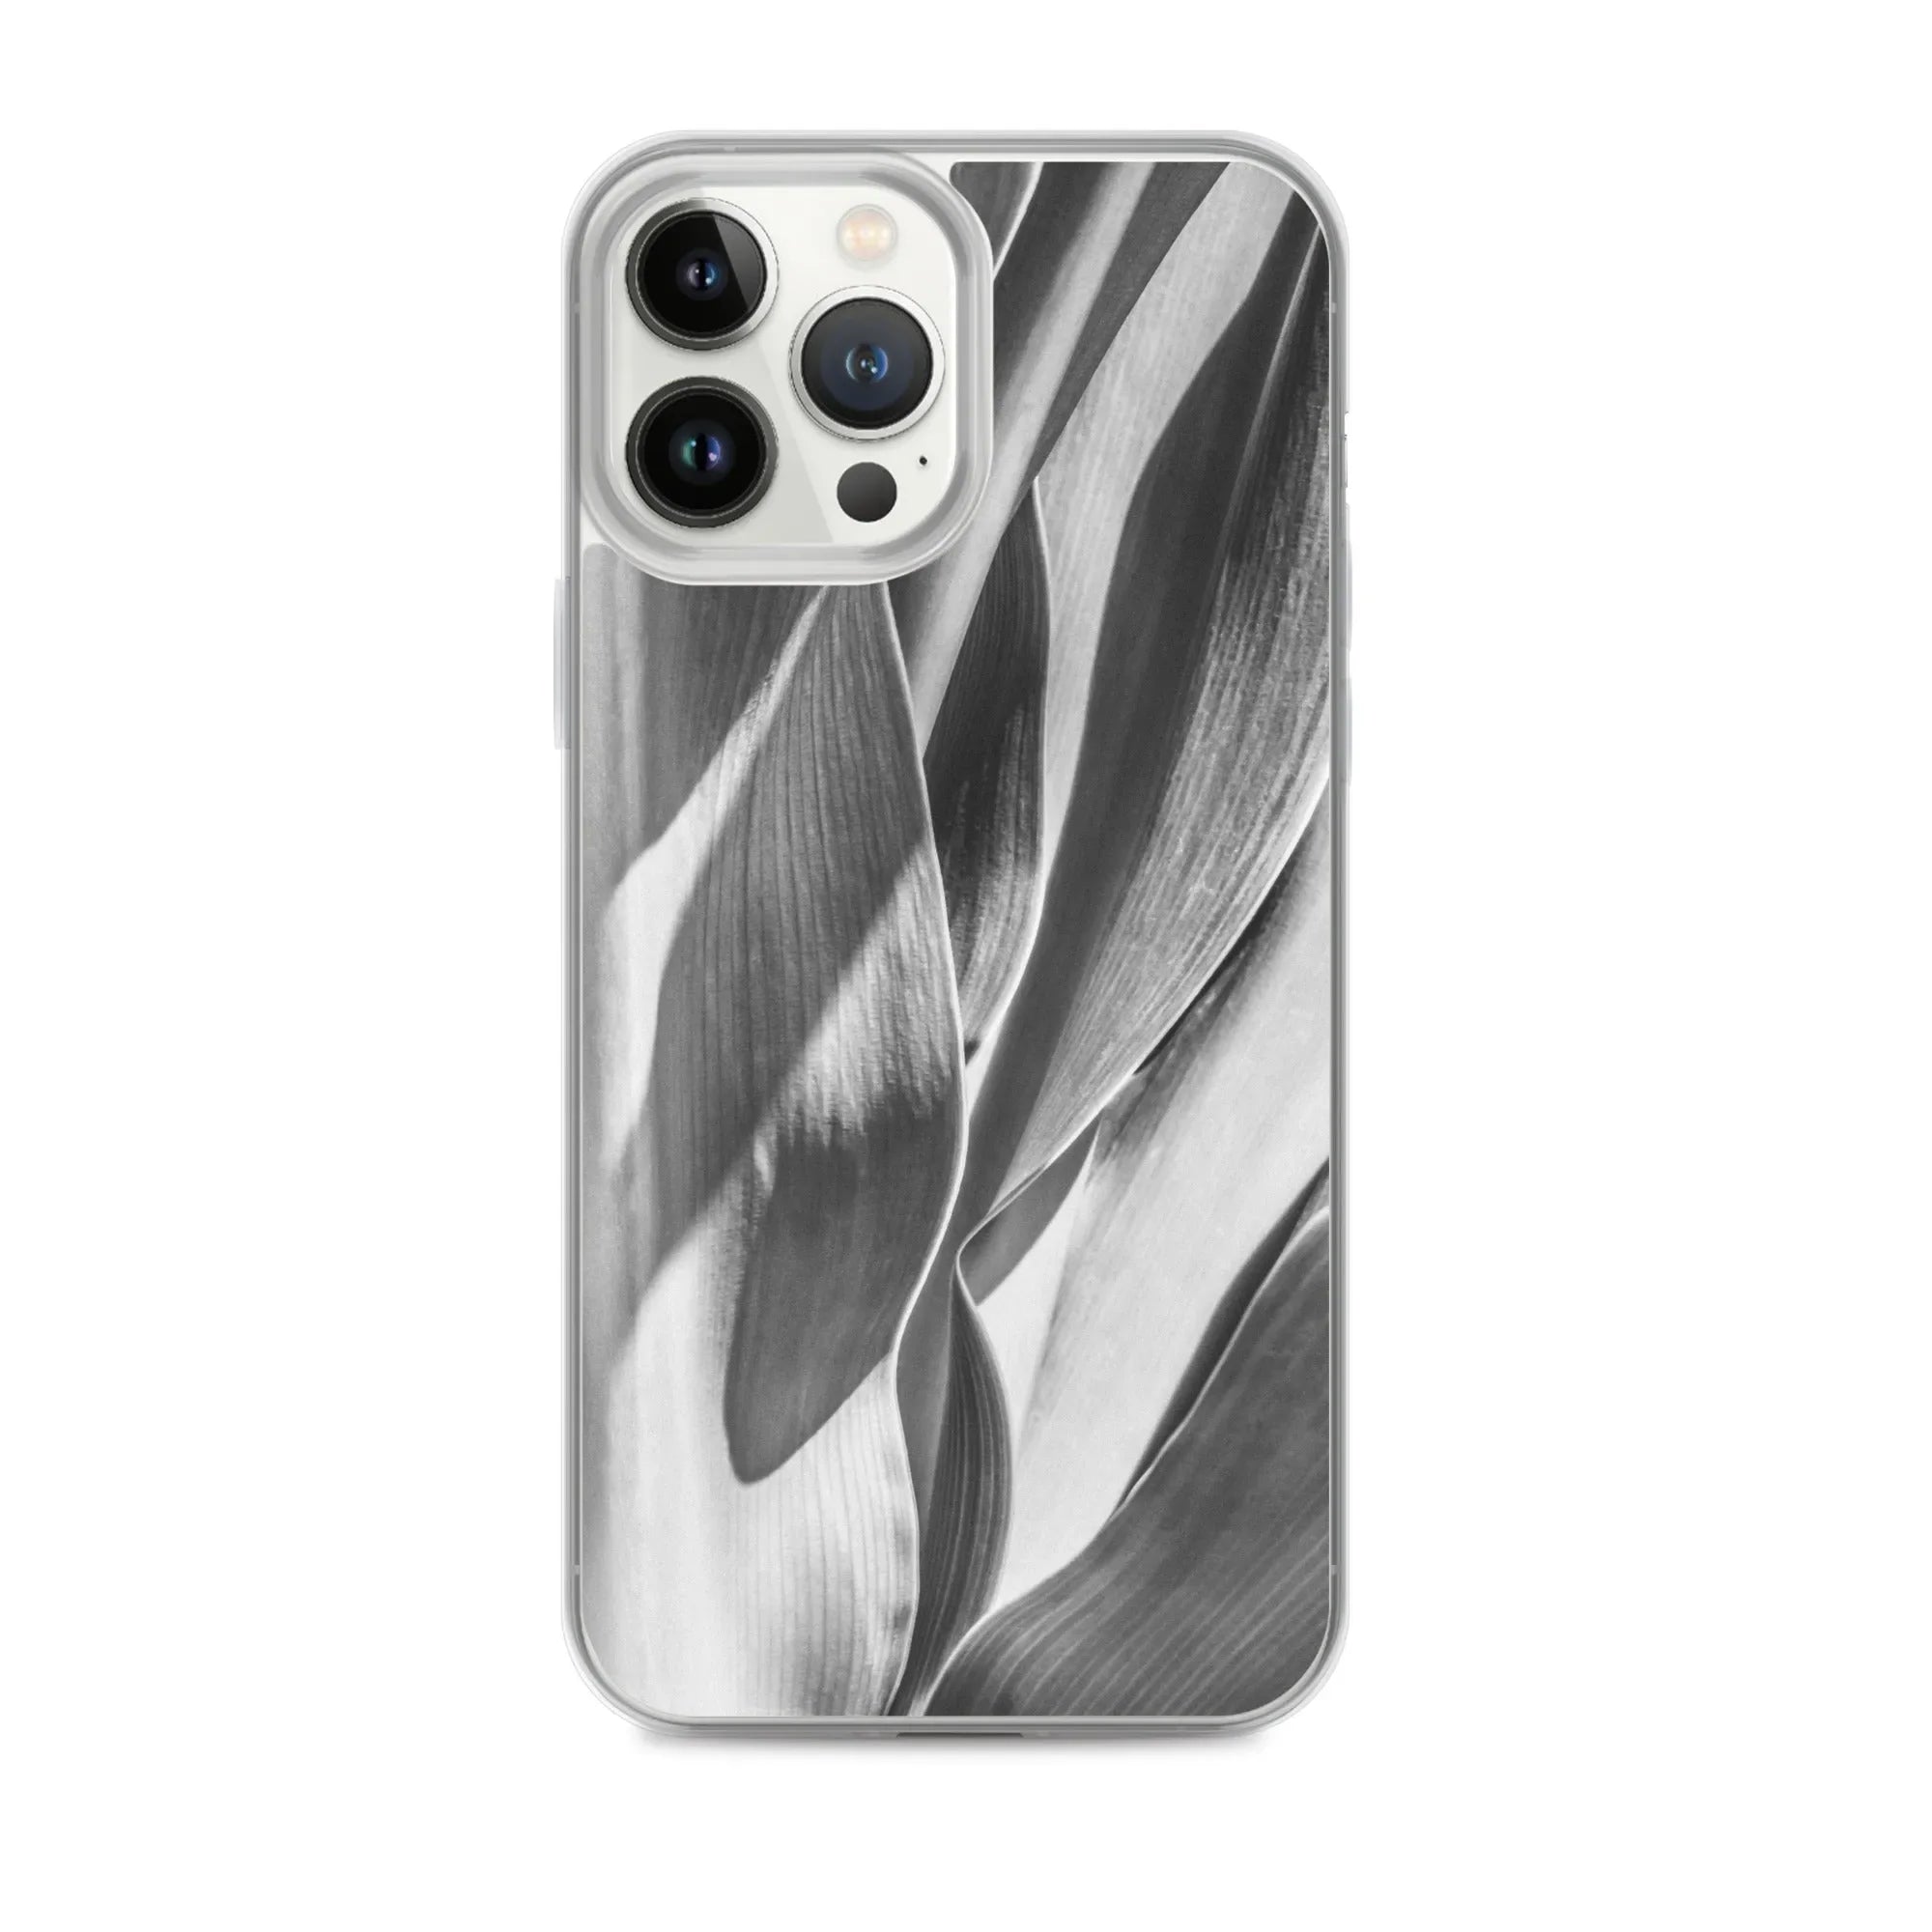 Into The Wild Botanical Art Iphone Case - Black And White - Iphone 13 Pro Max - Mobile Phone Cases - Aesthetic Art